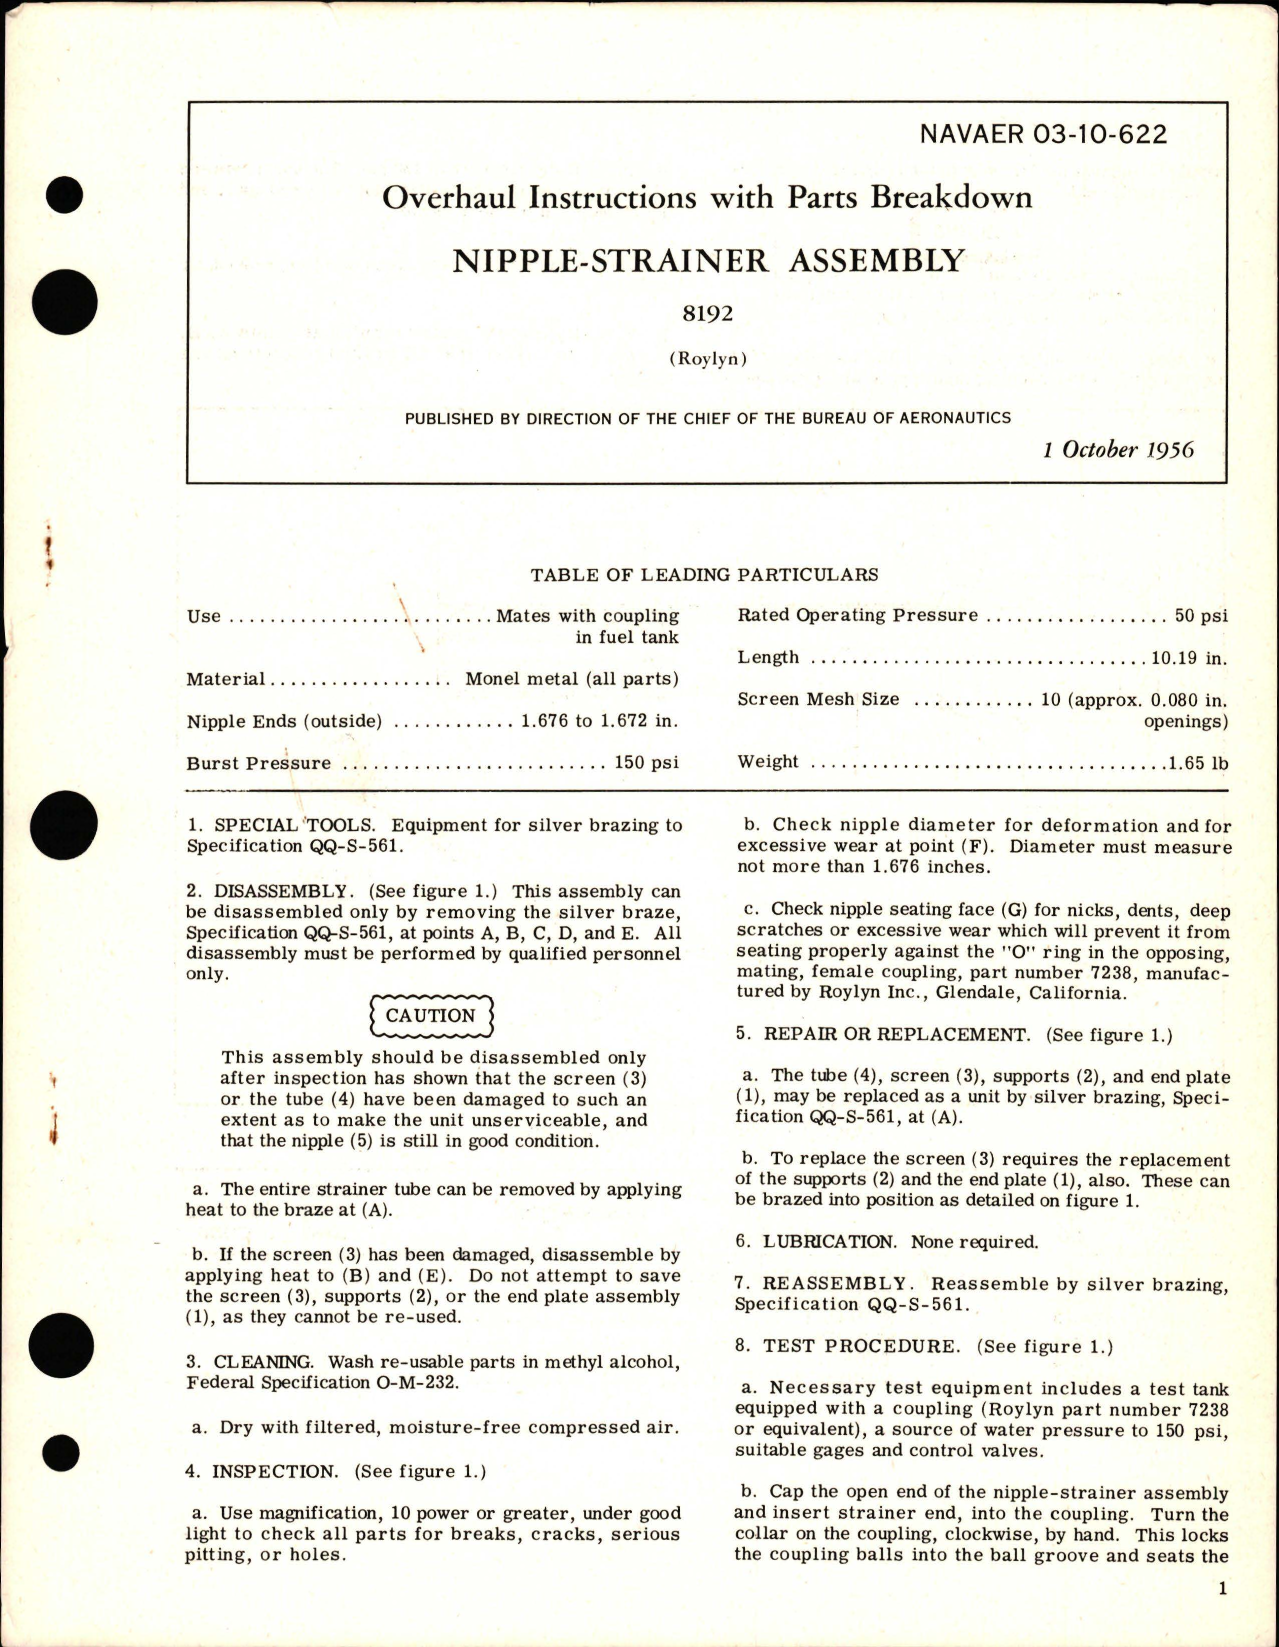 Sample page 1 from AirCorps Library document: Overhaul Instructions with Parts Breakdown for Nipple-Strainer Assembly - 8192